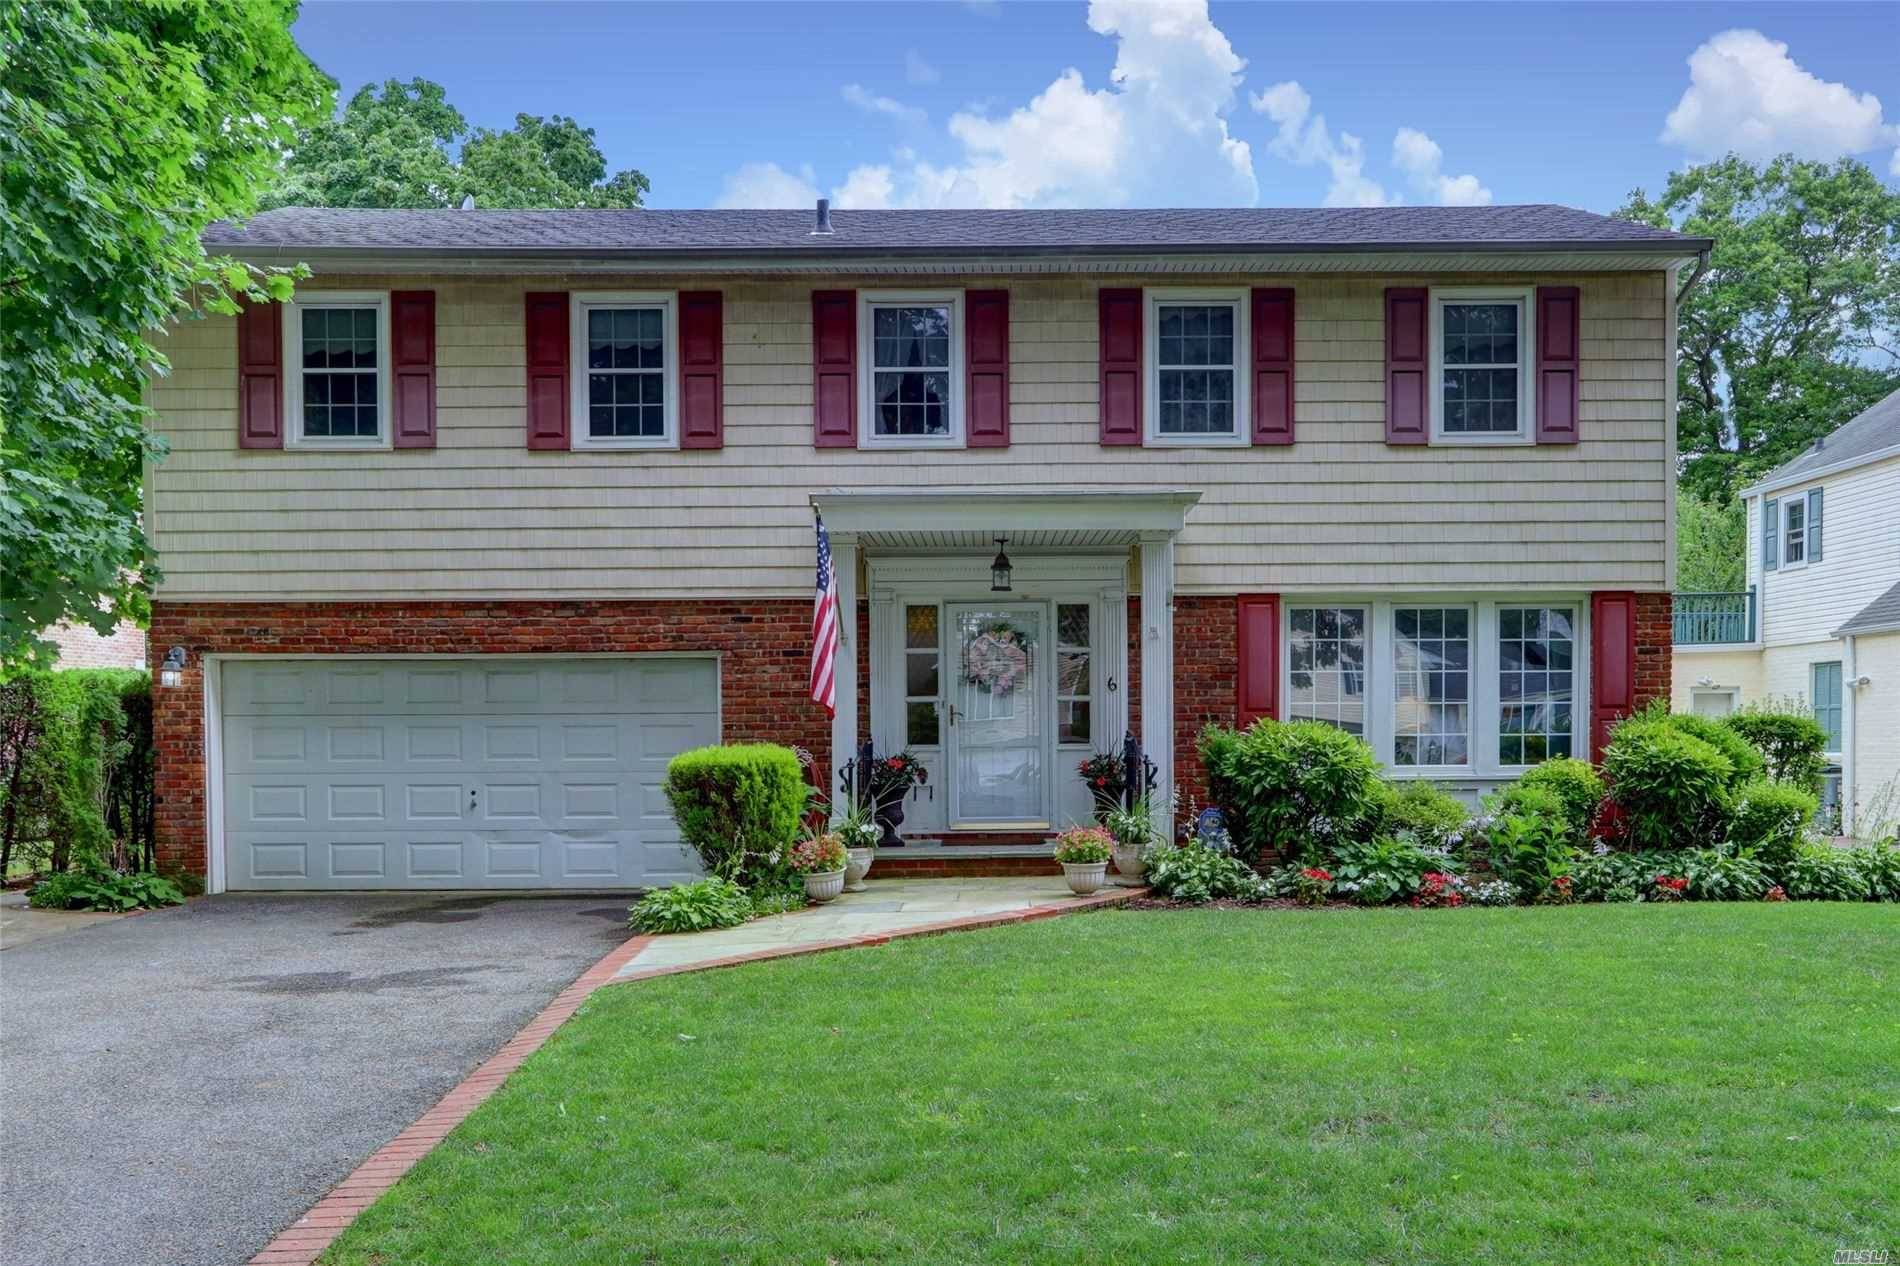 Spacious 5 Bedroom 2. 5 bath colonial with Master Suite, first floor laundry and nicely laid out first level.